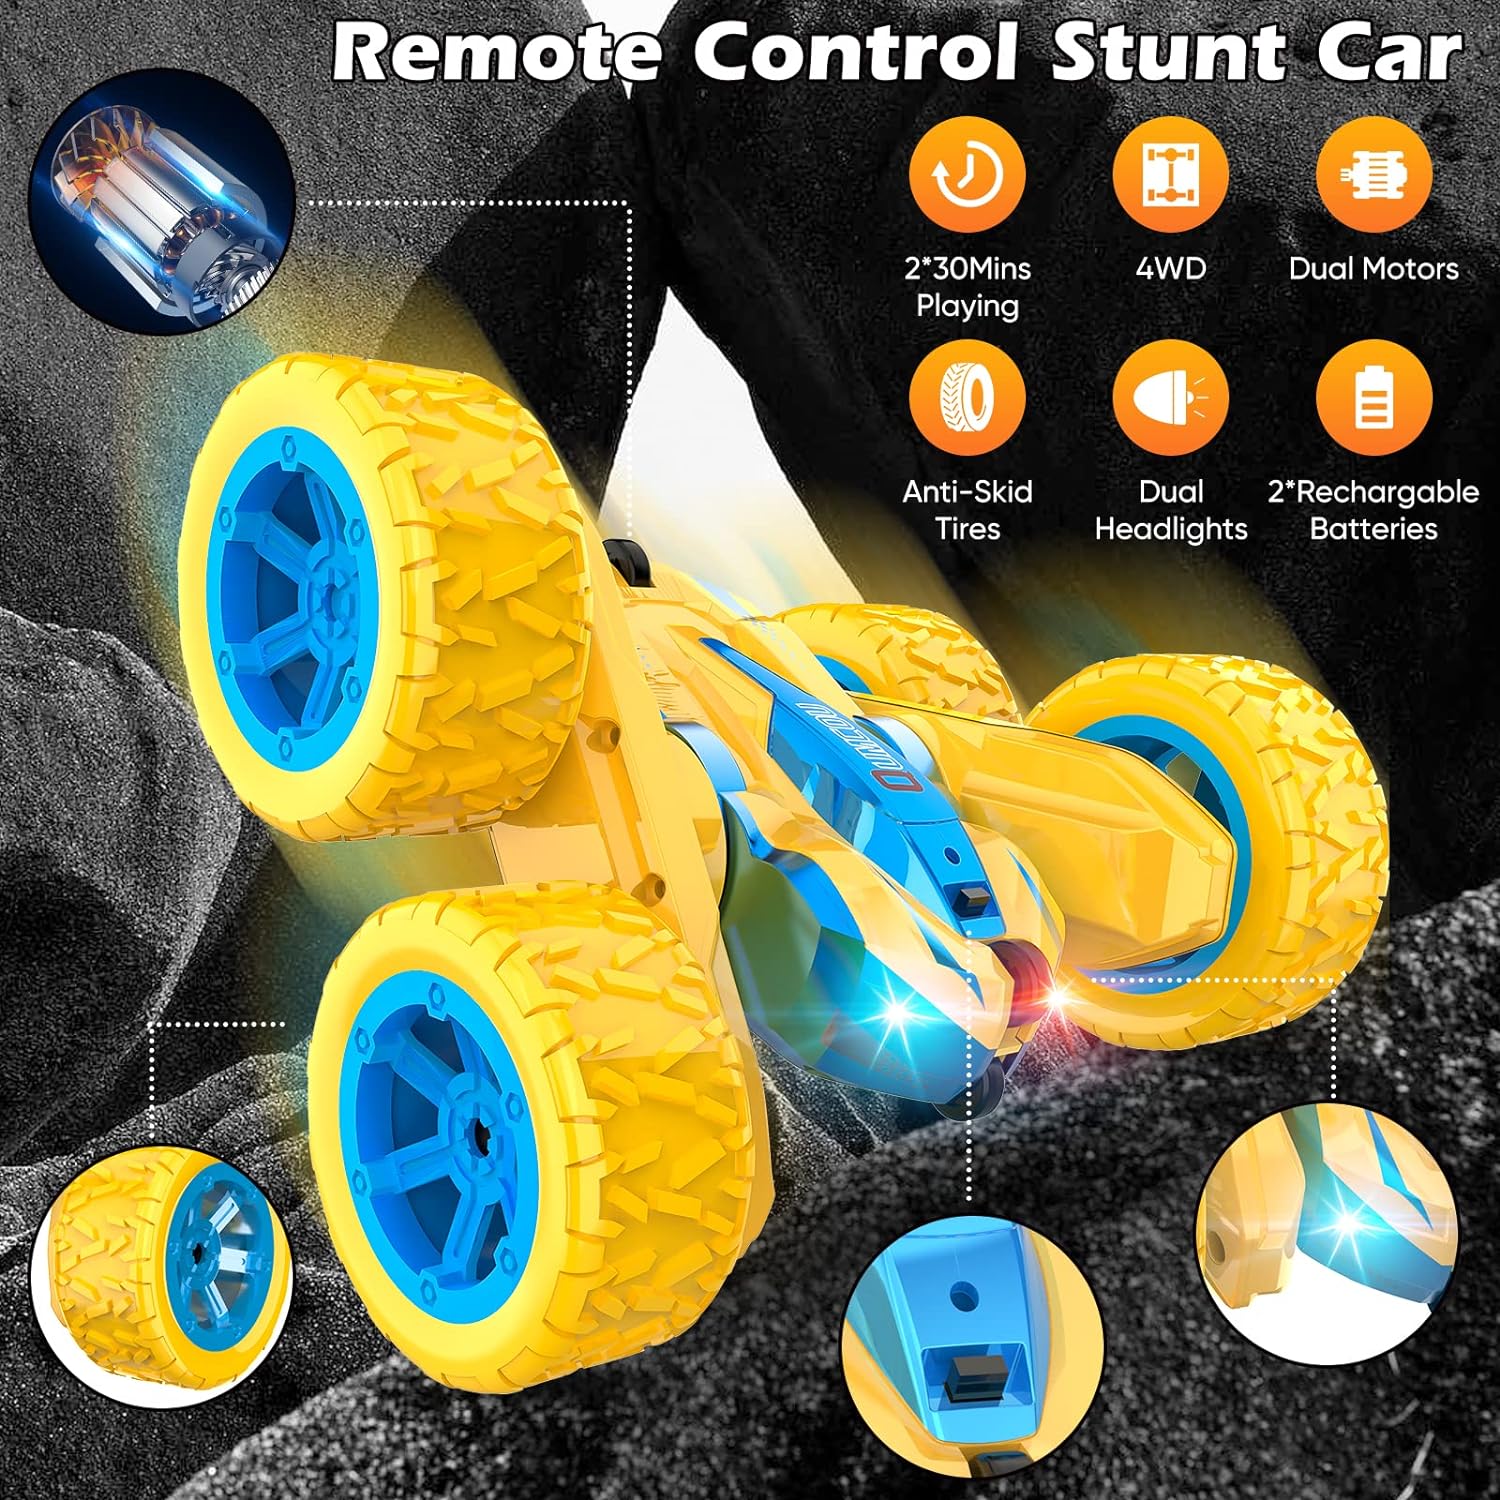 You are currently viewing Remote Control Car Review